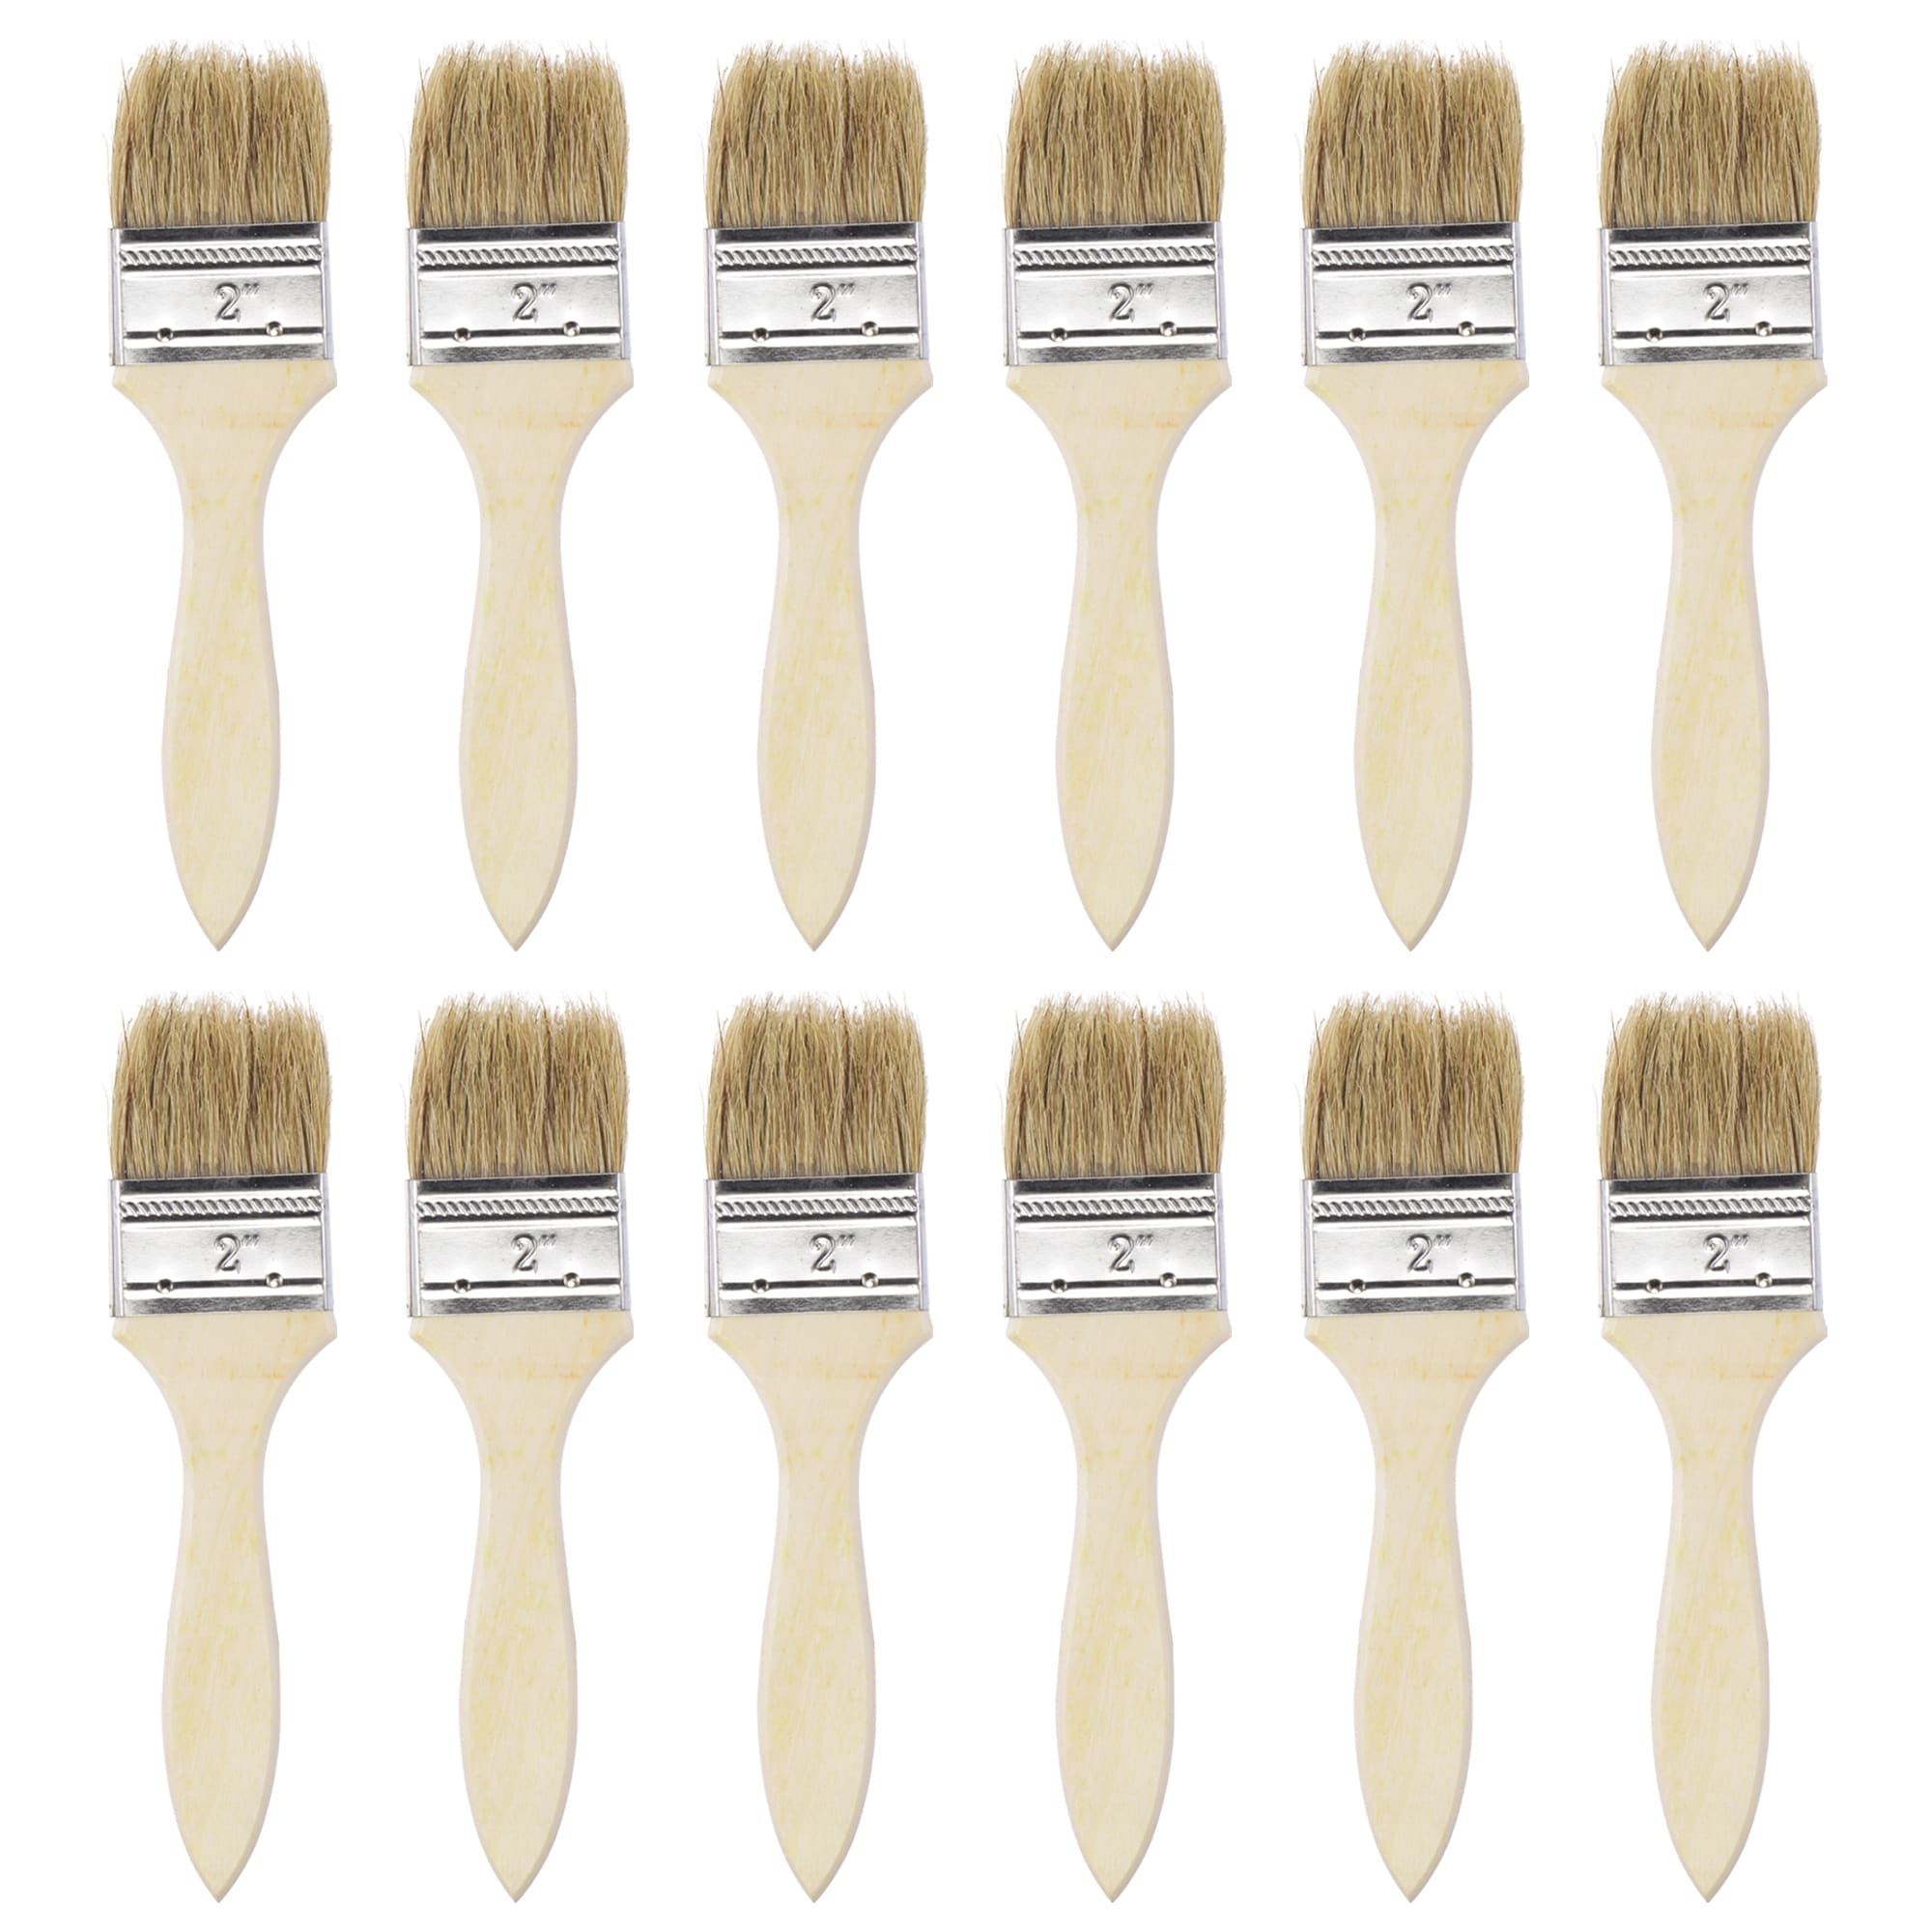 2 inch Paint Brush Natural Bristle Flat Edge Wood Handle for Painting 12pcs - Brown - 2 Inches - Brushes